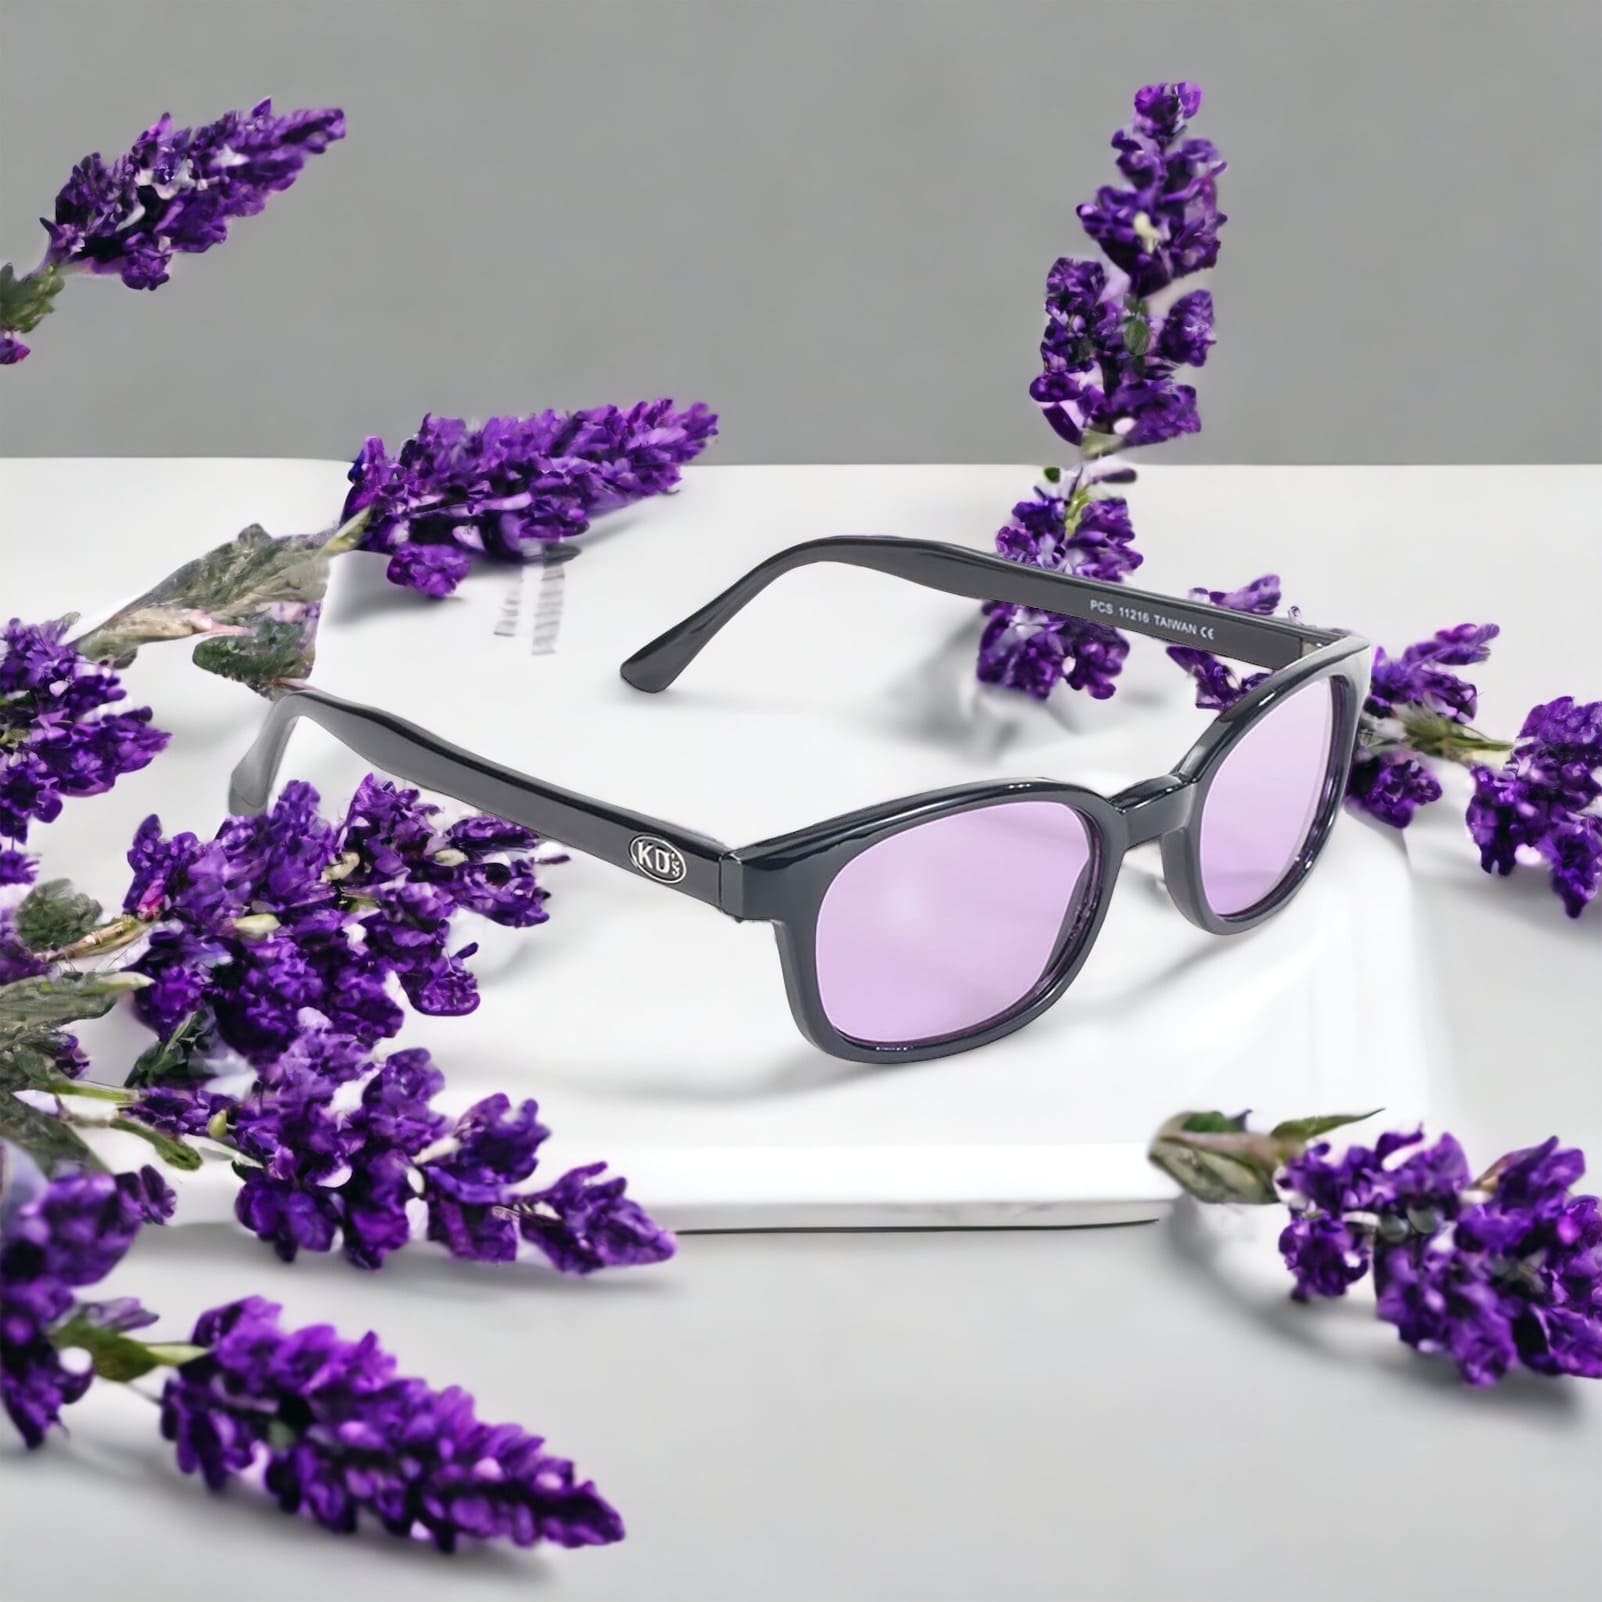 Large X-KD's 11216 sunglasses worn by Jax Teller and the Sons of Anarchy bikers with a sublime black frame and durable purple polycarbonate lenses set on a towel surrounded by lavender.